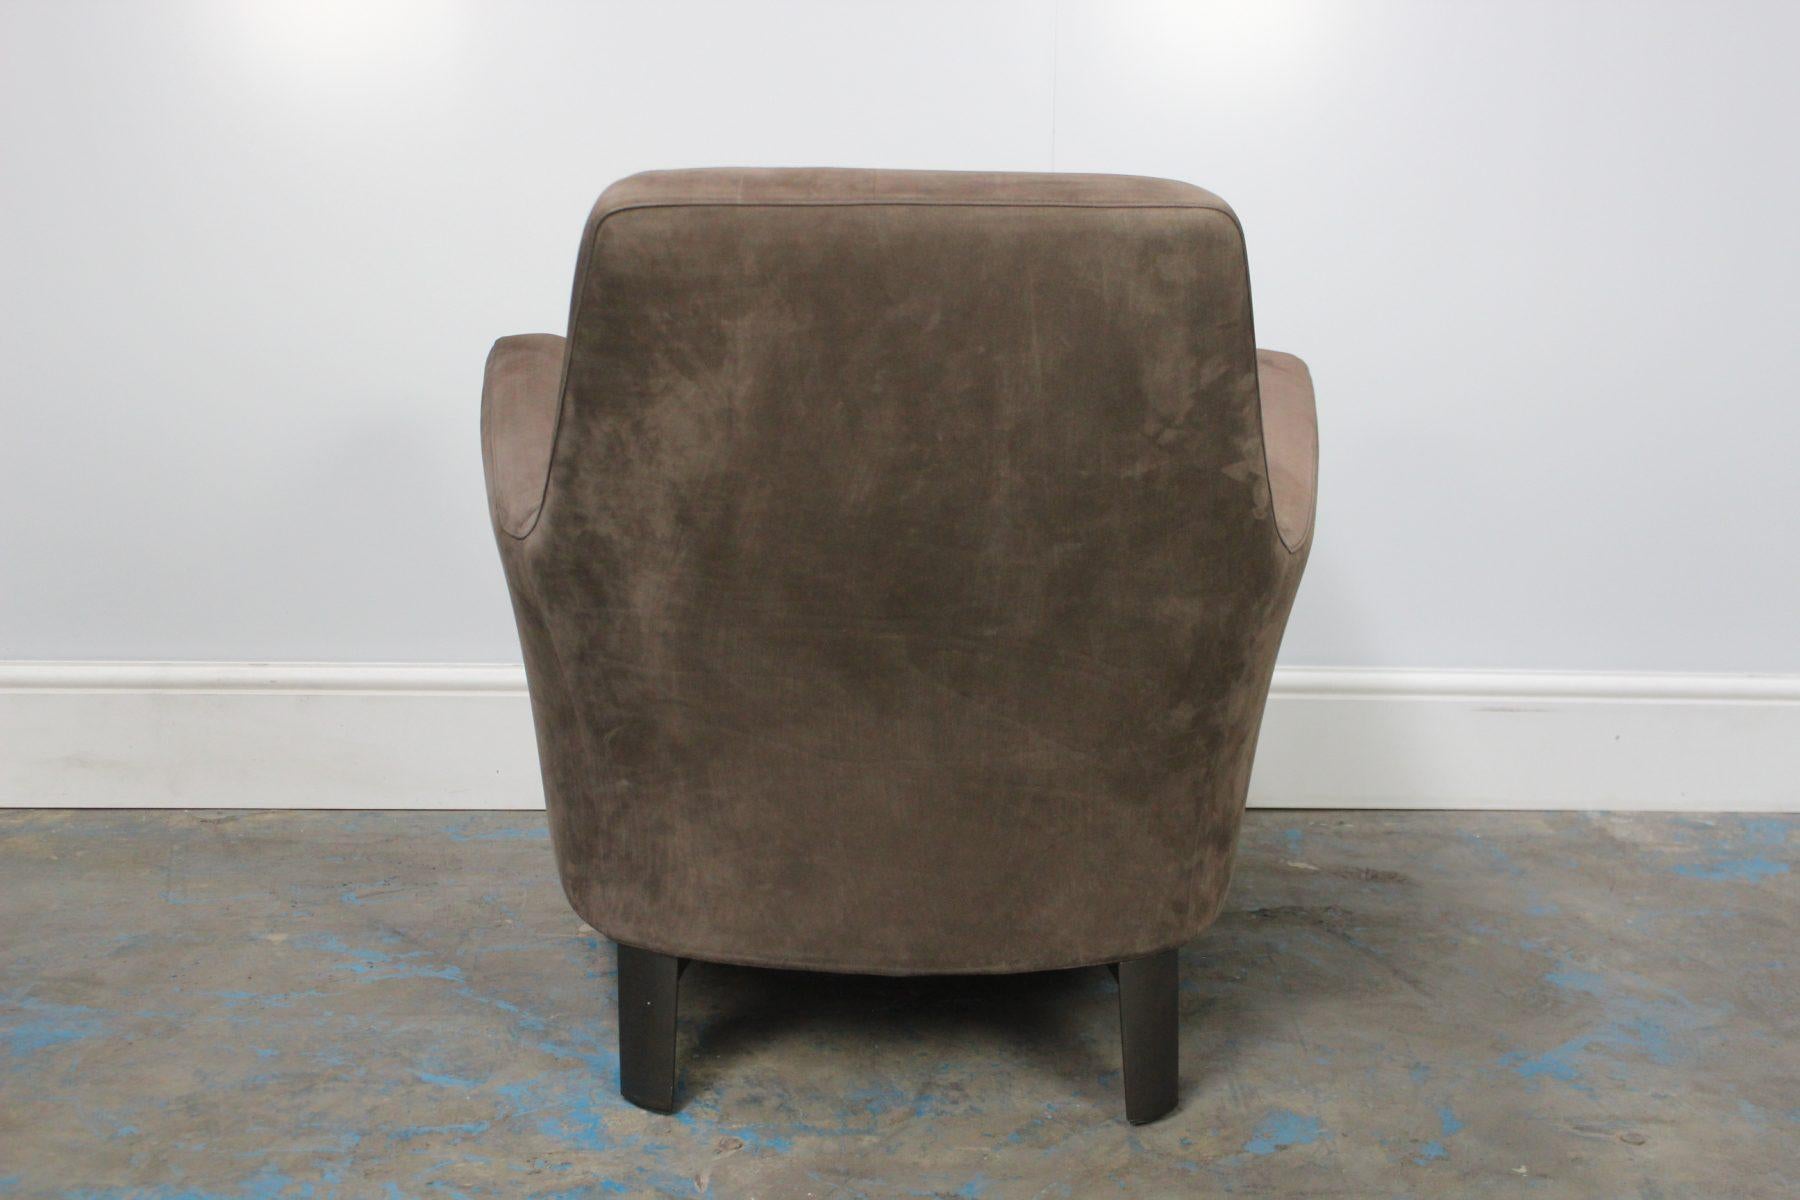 Contemporary Peerless Pristine Minotti “Denny” Armchair in Suede Leather For Sale